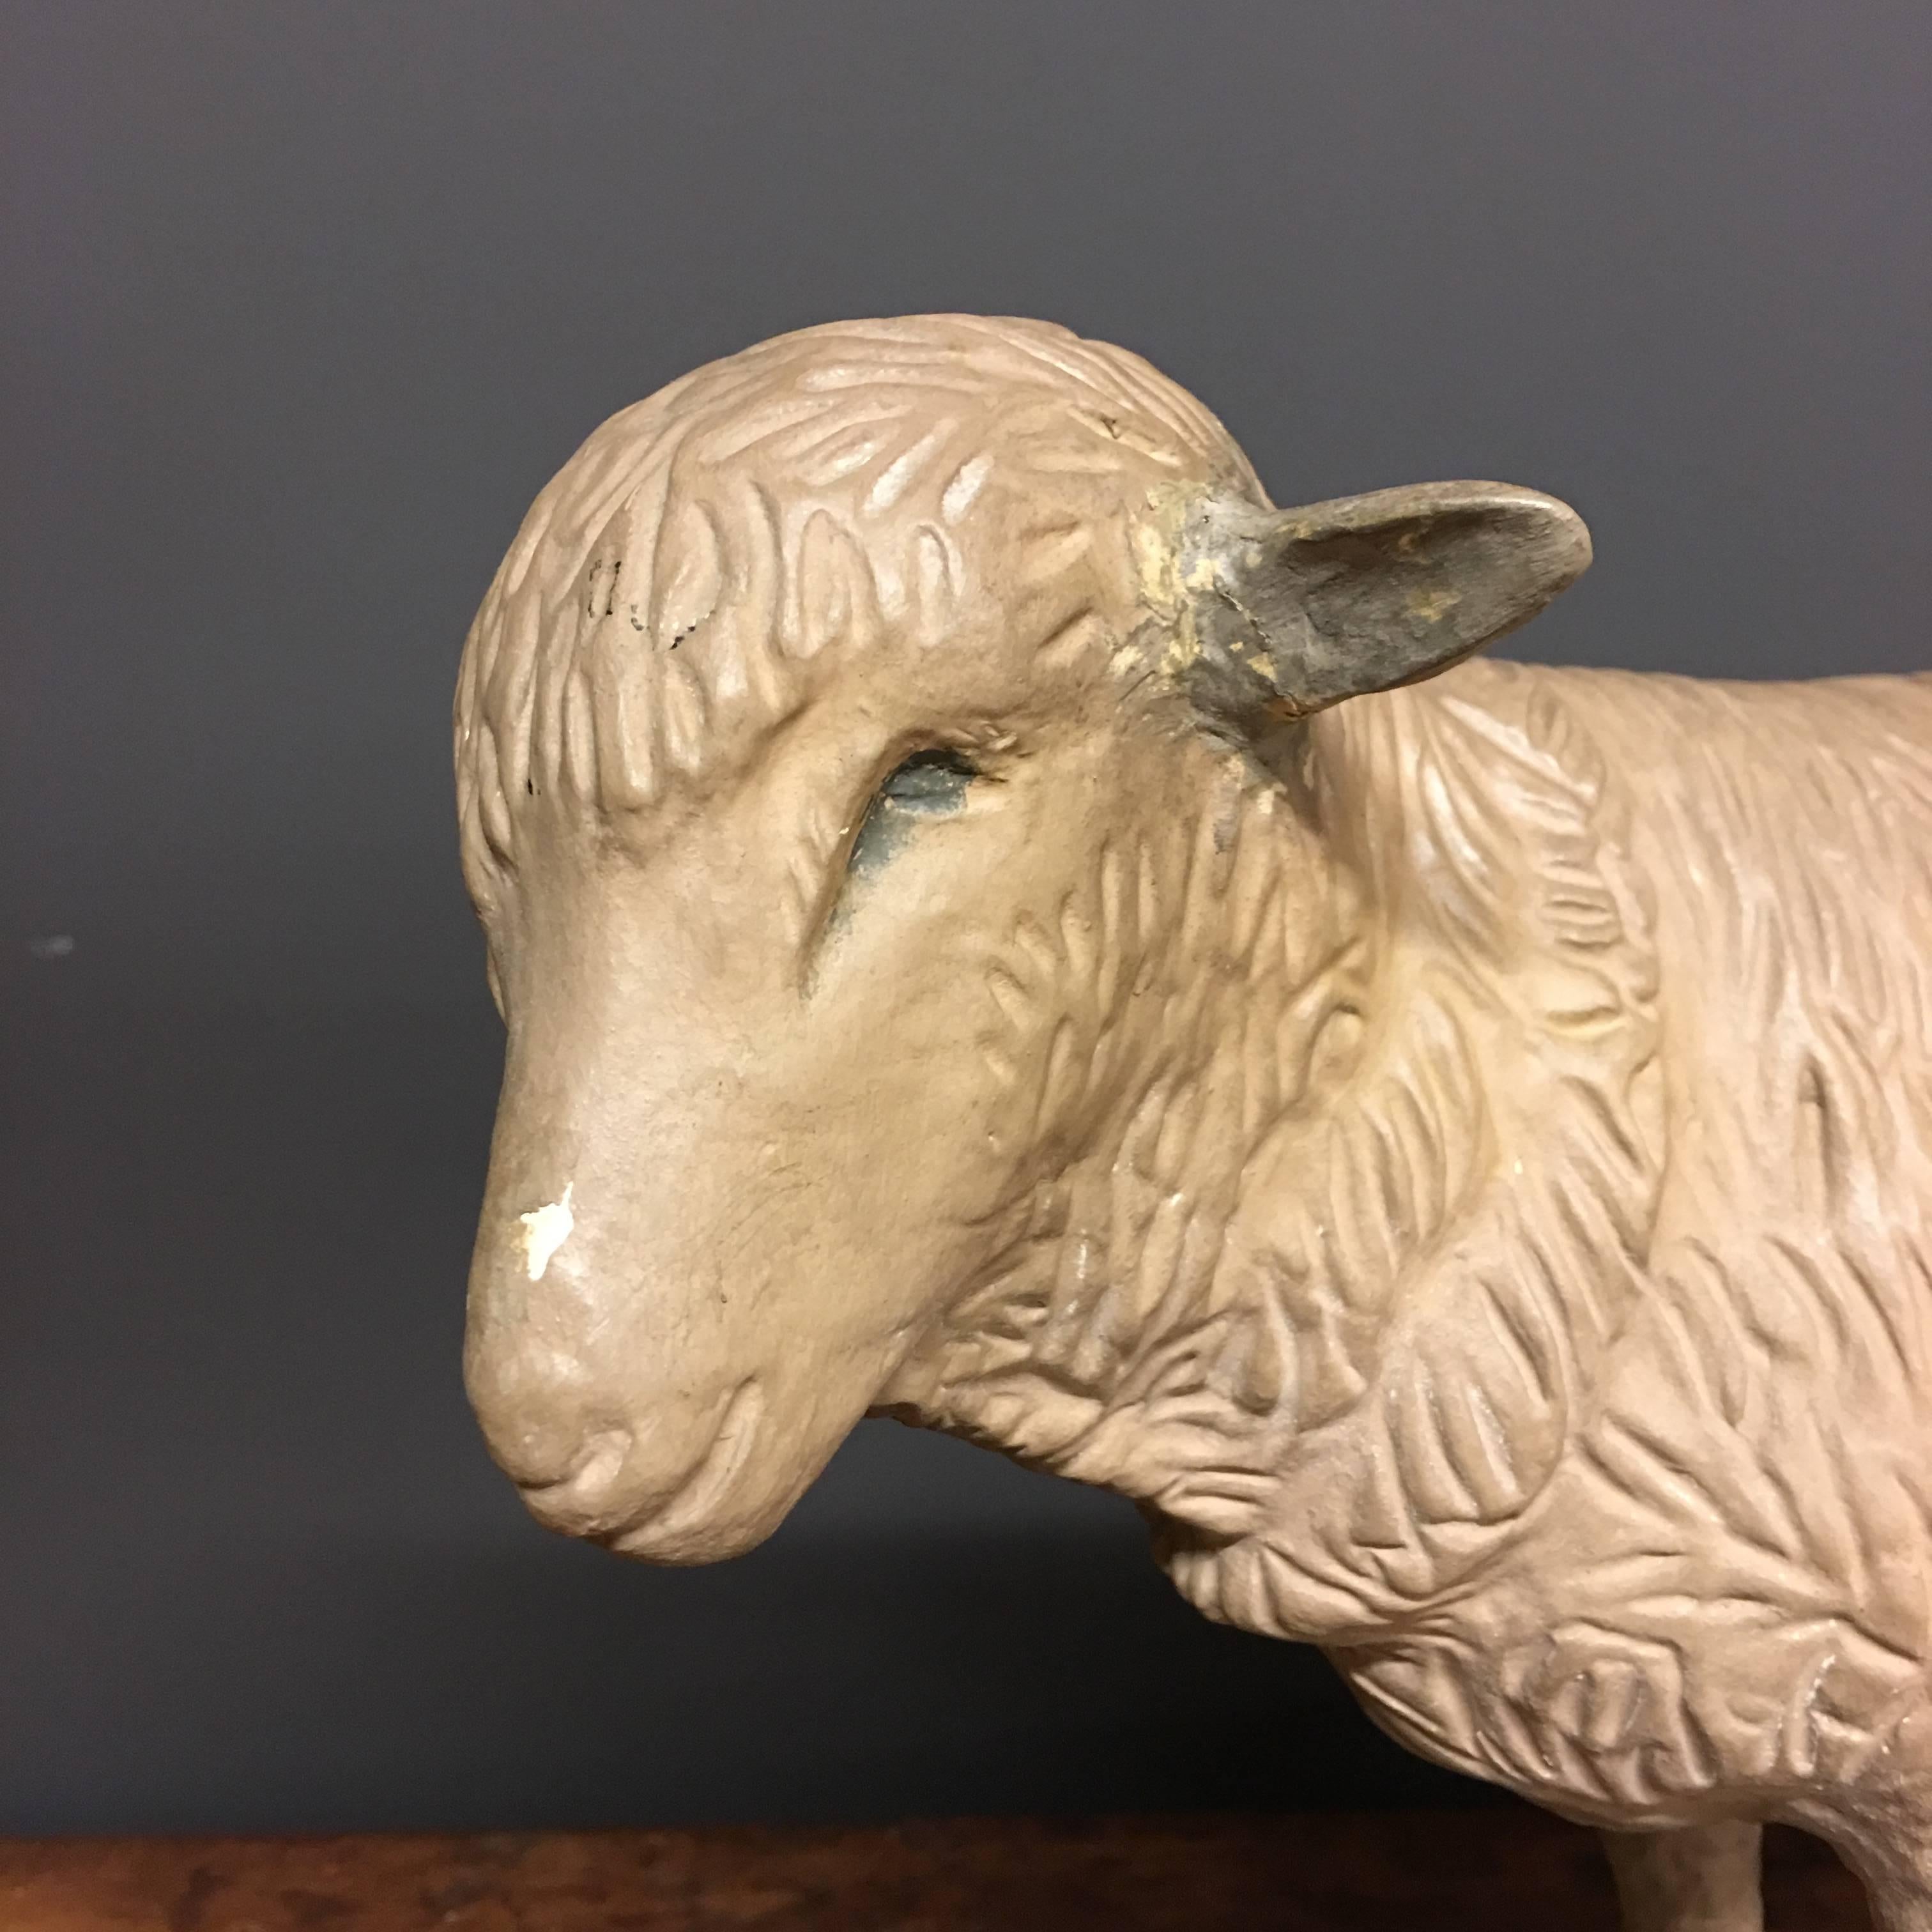 This sheep was used for presentation in a butcher shop in Germany. It is made of plaster during the early 20th century. This sheep remains in good vintage condition.